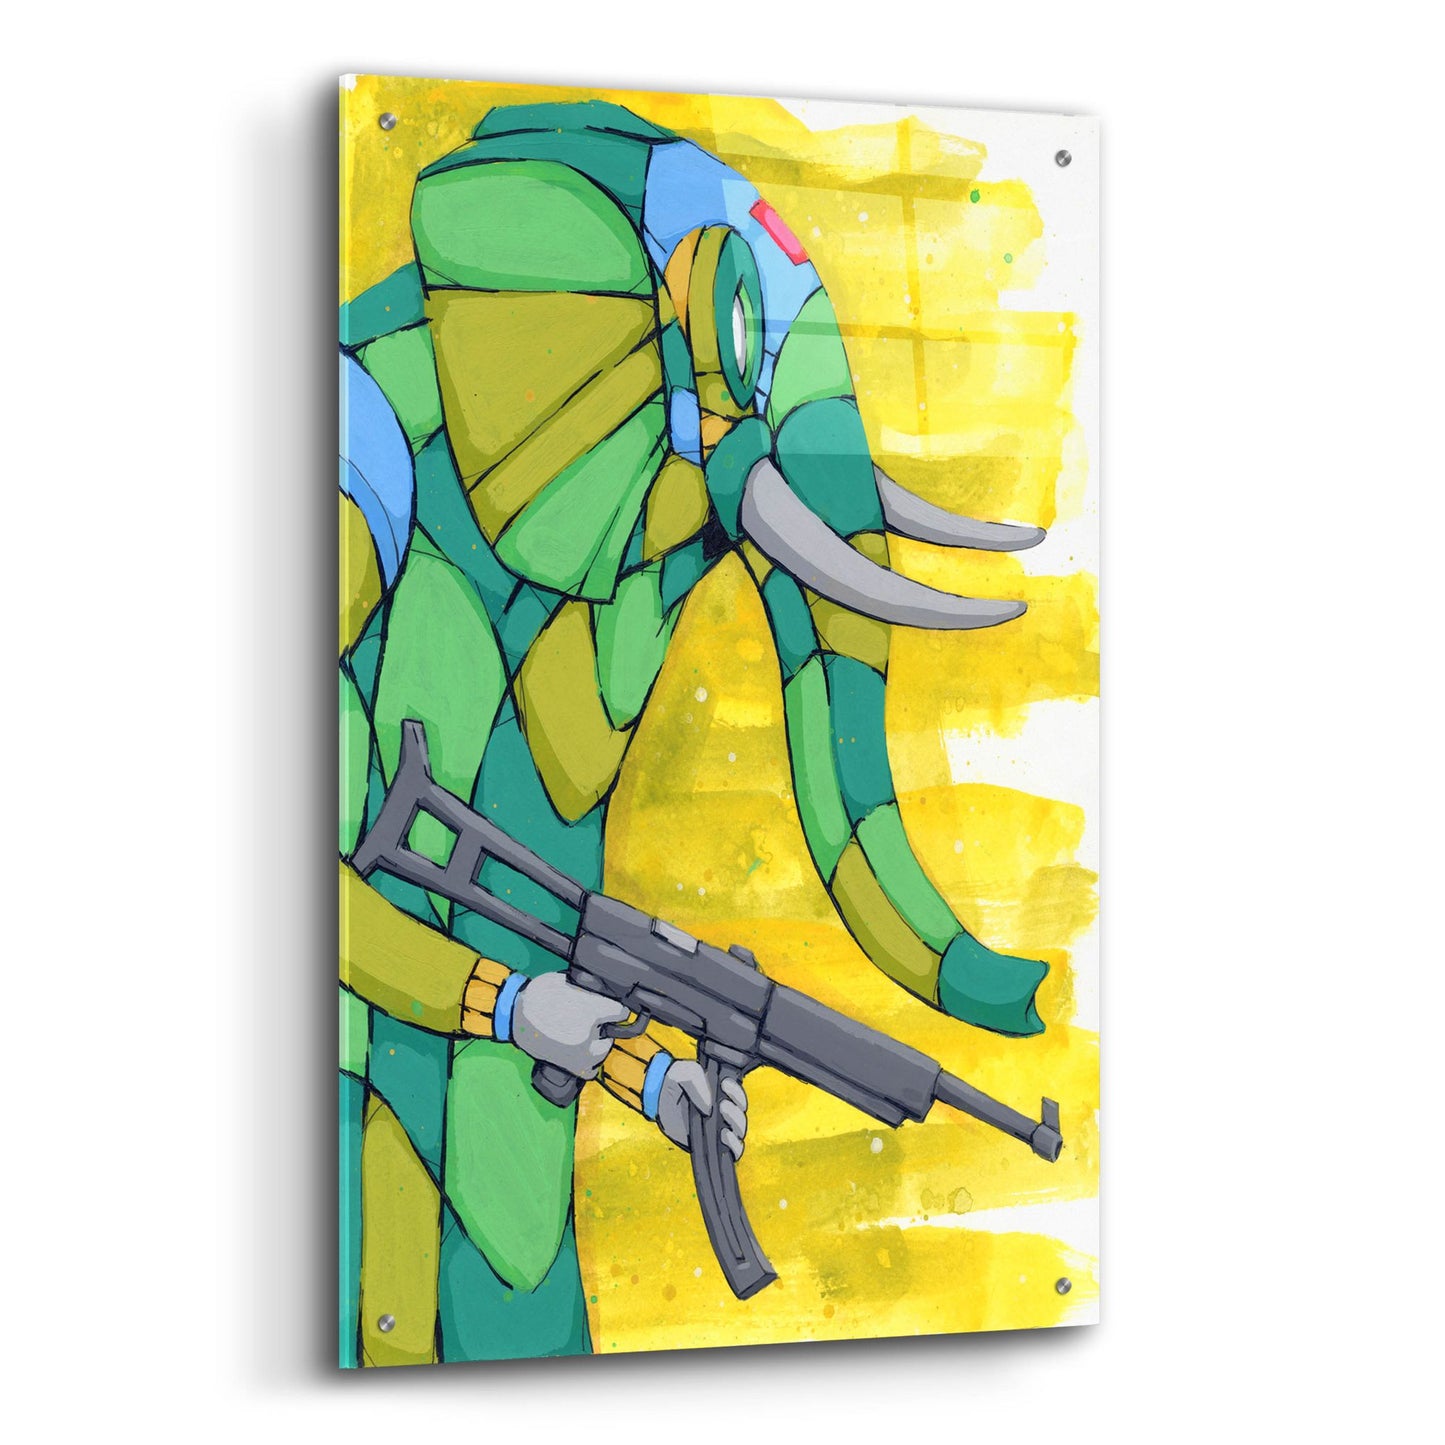 Epic Art 'Protecting his Ivory' by Ric Stultz, Acrylic Glass Wall Art,24x36